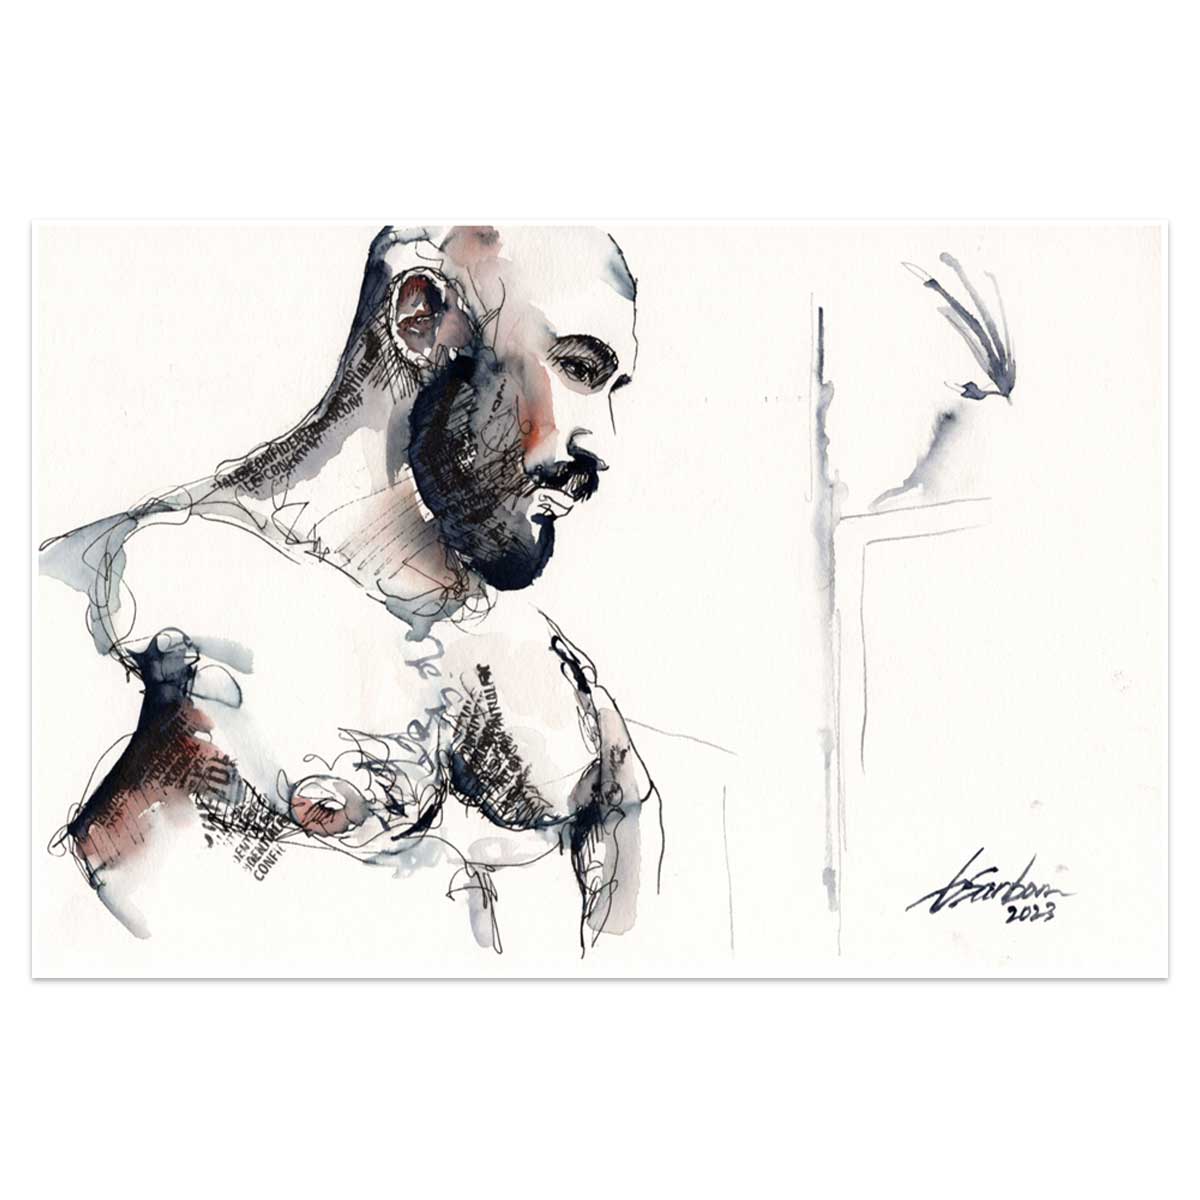 Rugged Elegance - Bearded and Muscular - 6x9" Original Watercolor and Ink Painting